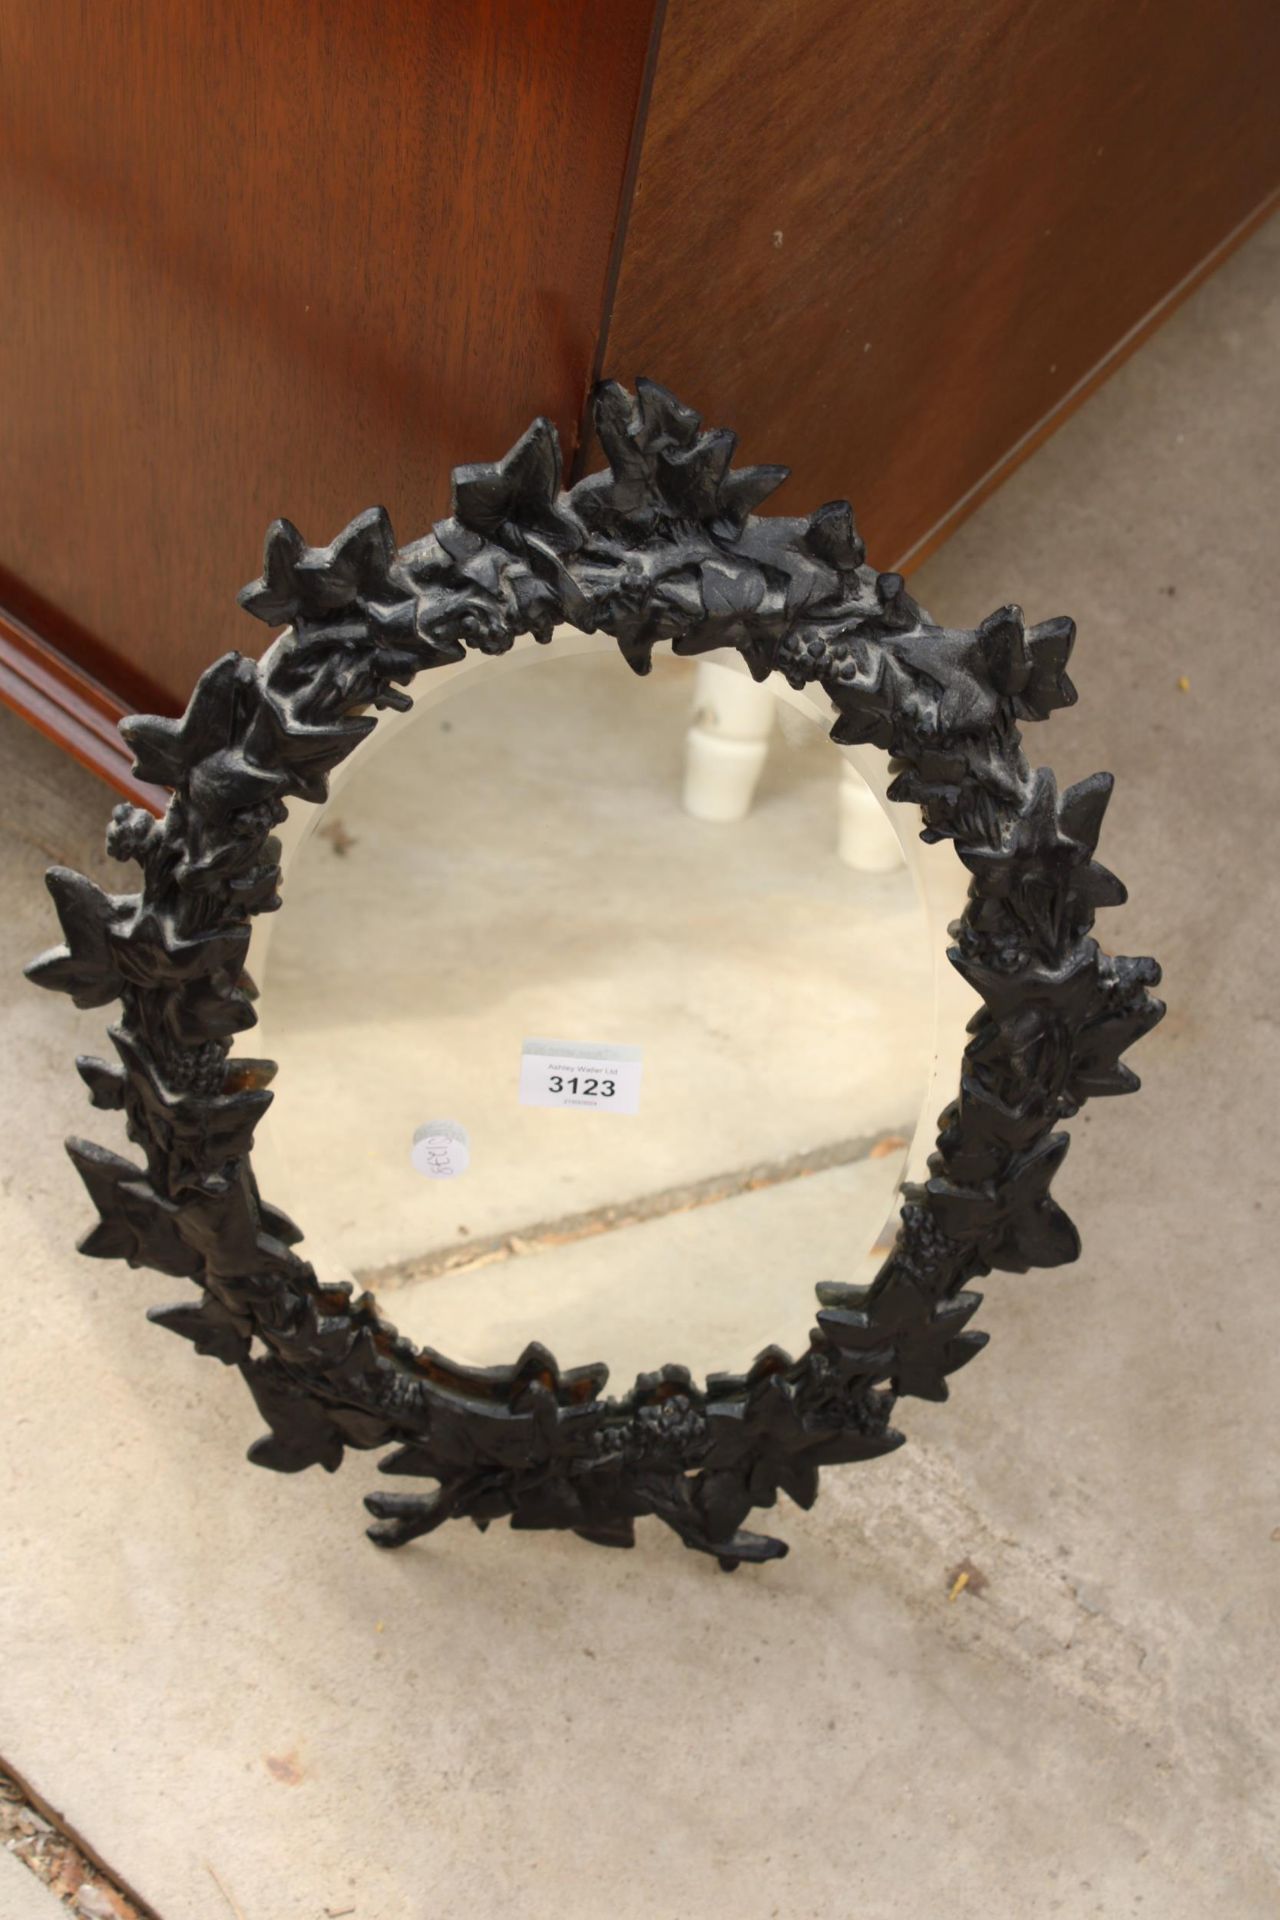 A VICTORIAN STYLE CAST IRON WALL MIRROR WITH VINE LEAF DECORATION, 19" X 14" - Image 2 of 2